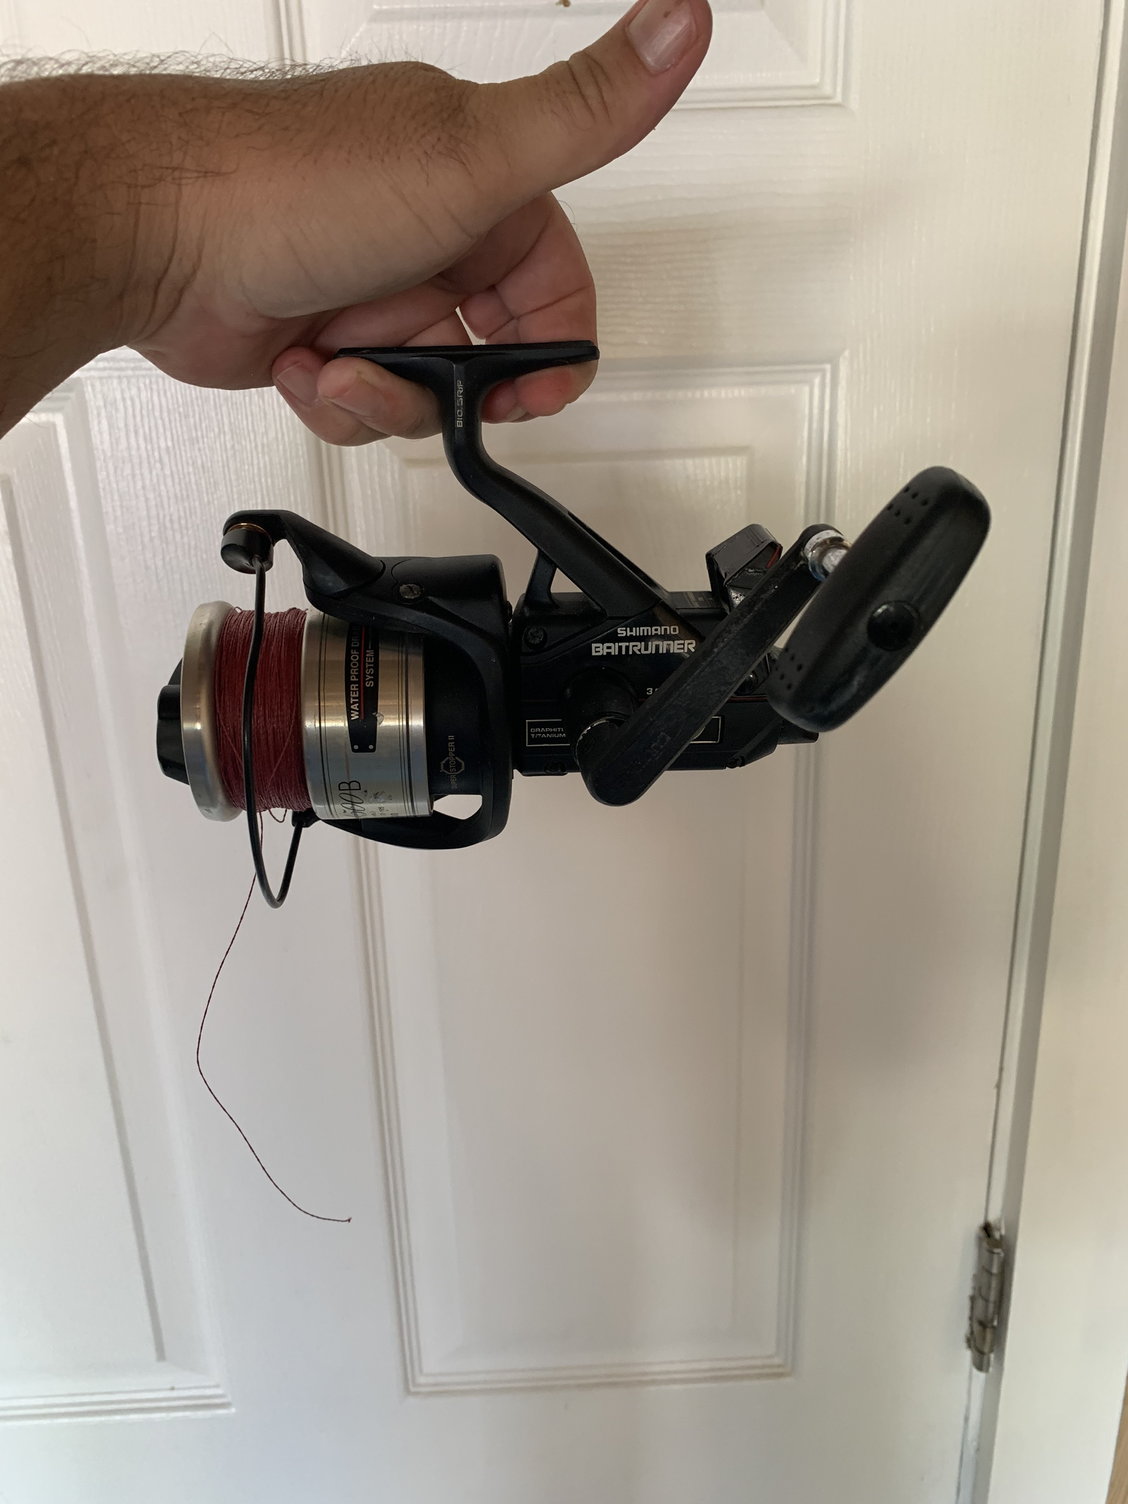 Shimano Thunnus, Baitrunners, misc reels/rods for sale - The Hull Truth -  Boating and Fishing Forum